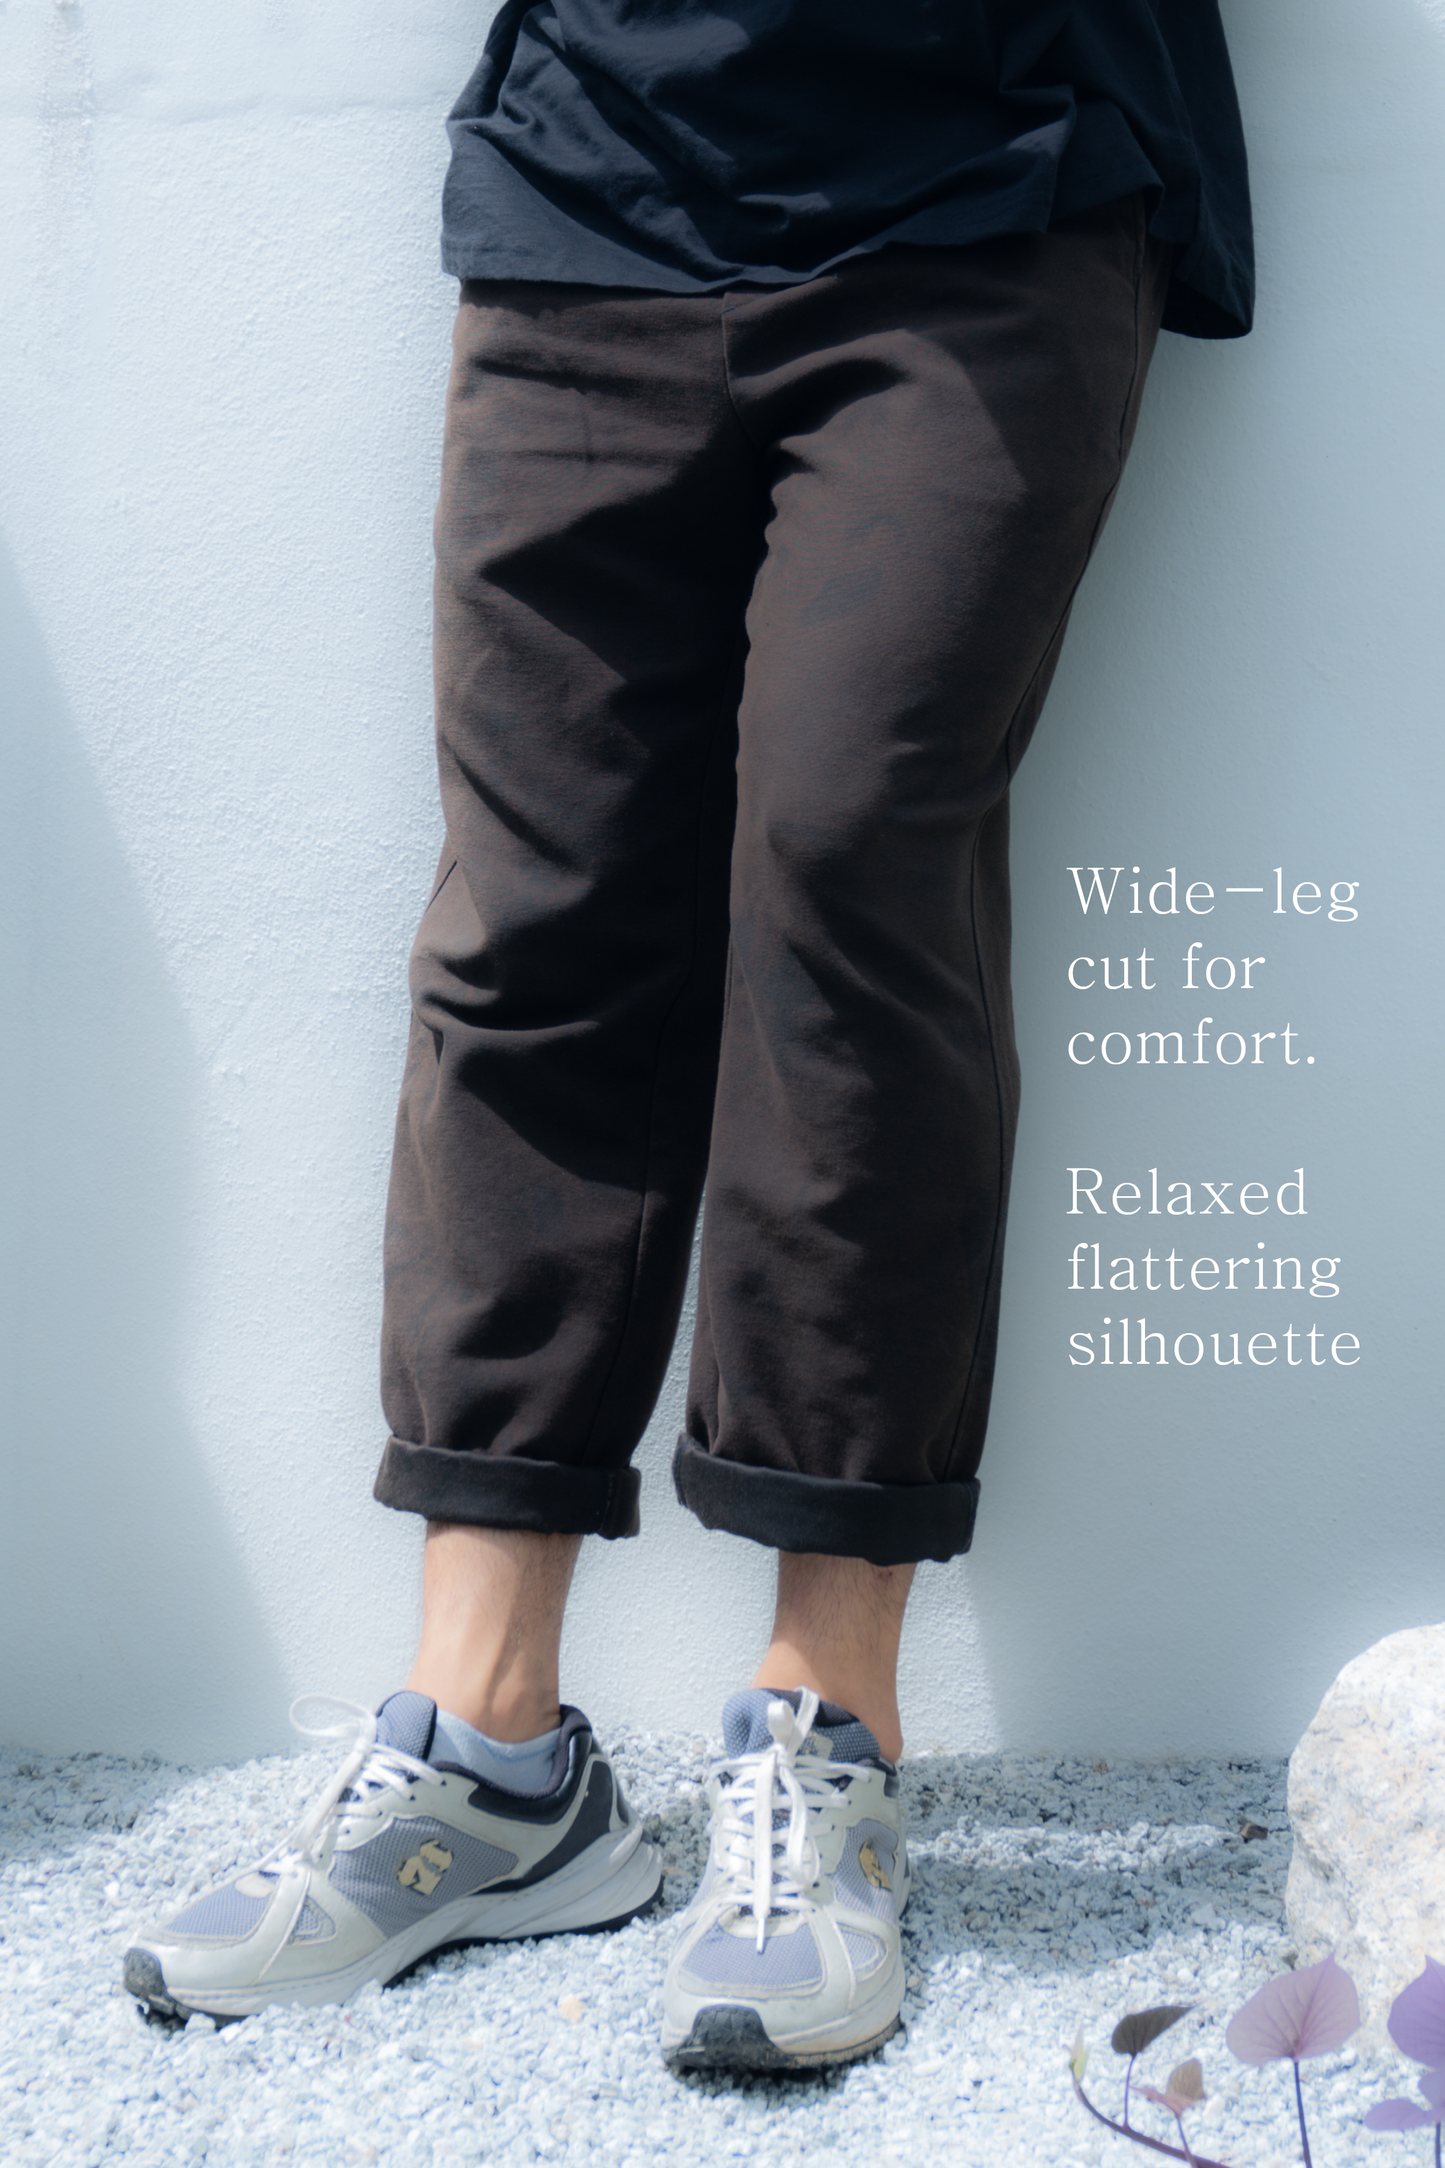 sw1 straight-leg relaxed twill trousers [hand-dyed brown]